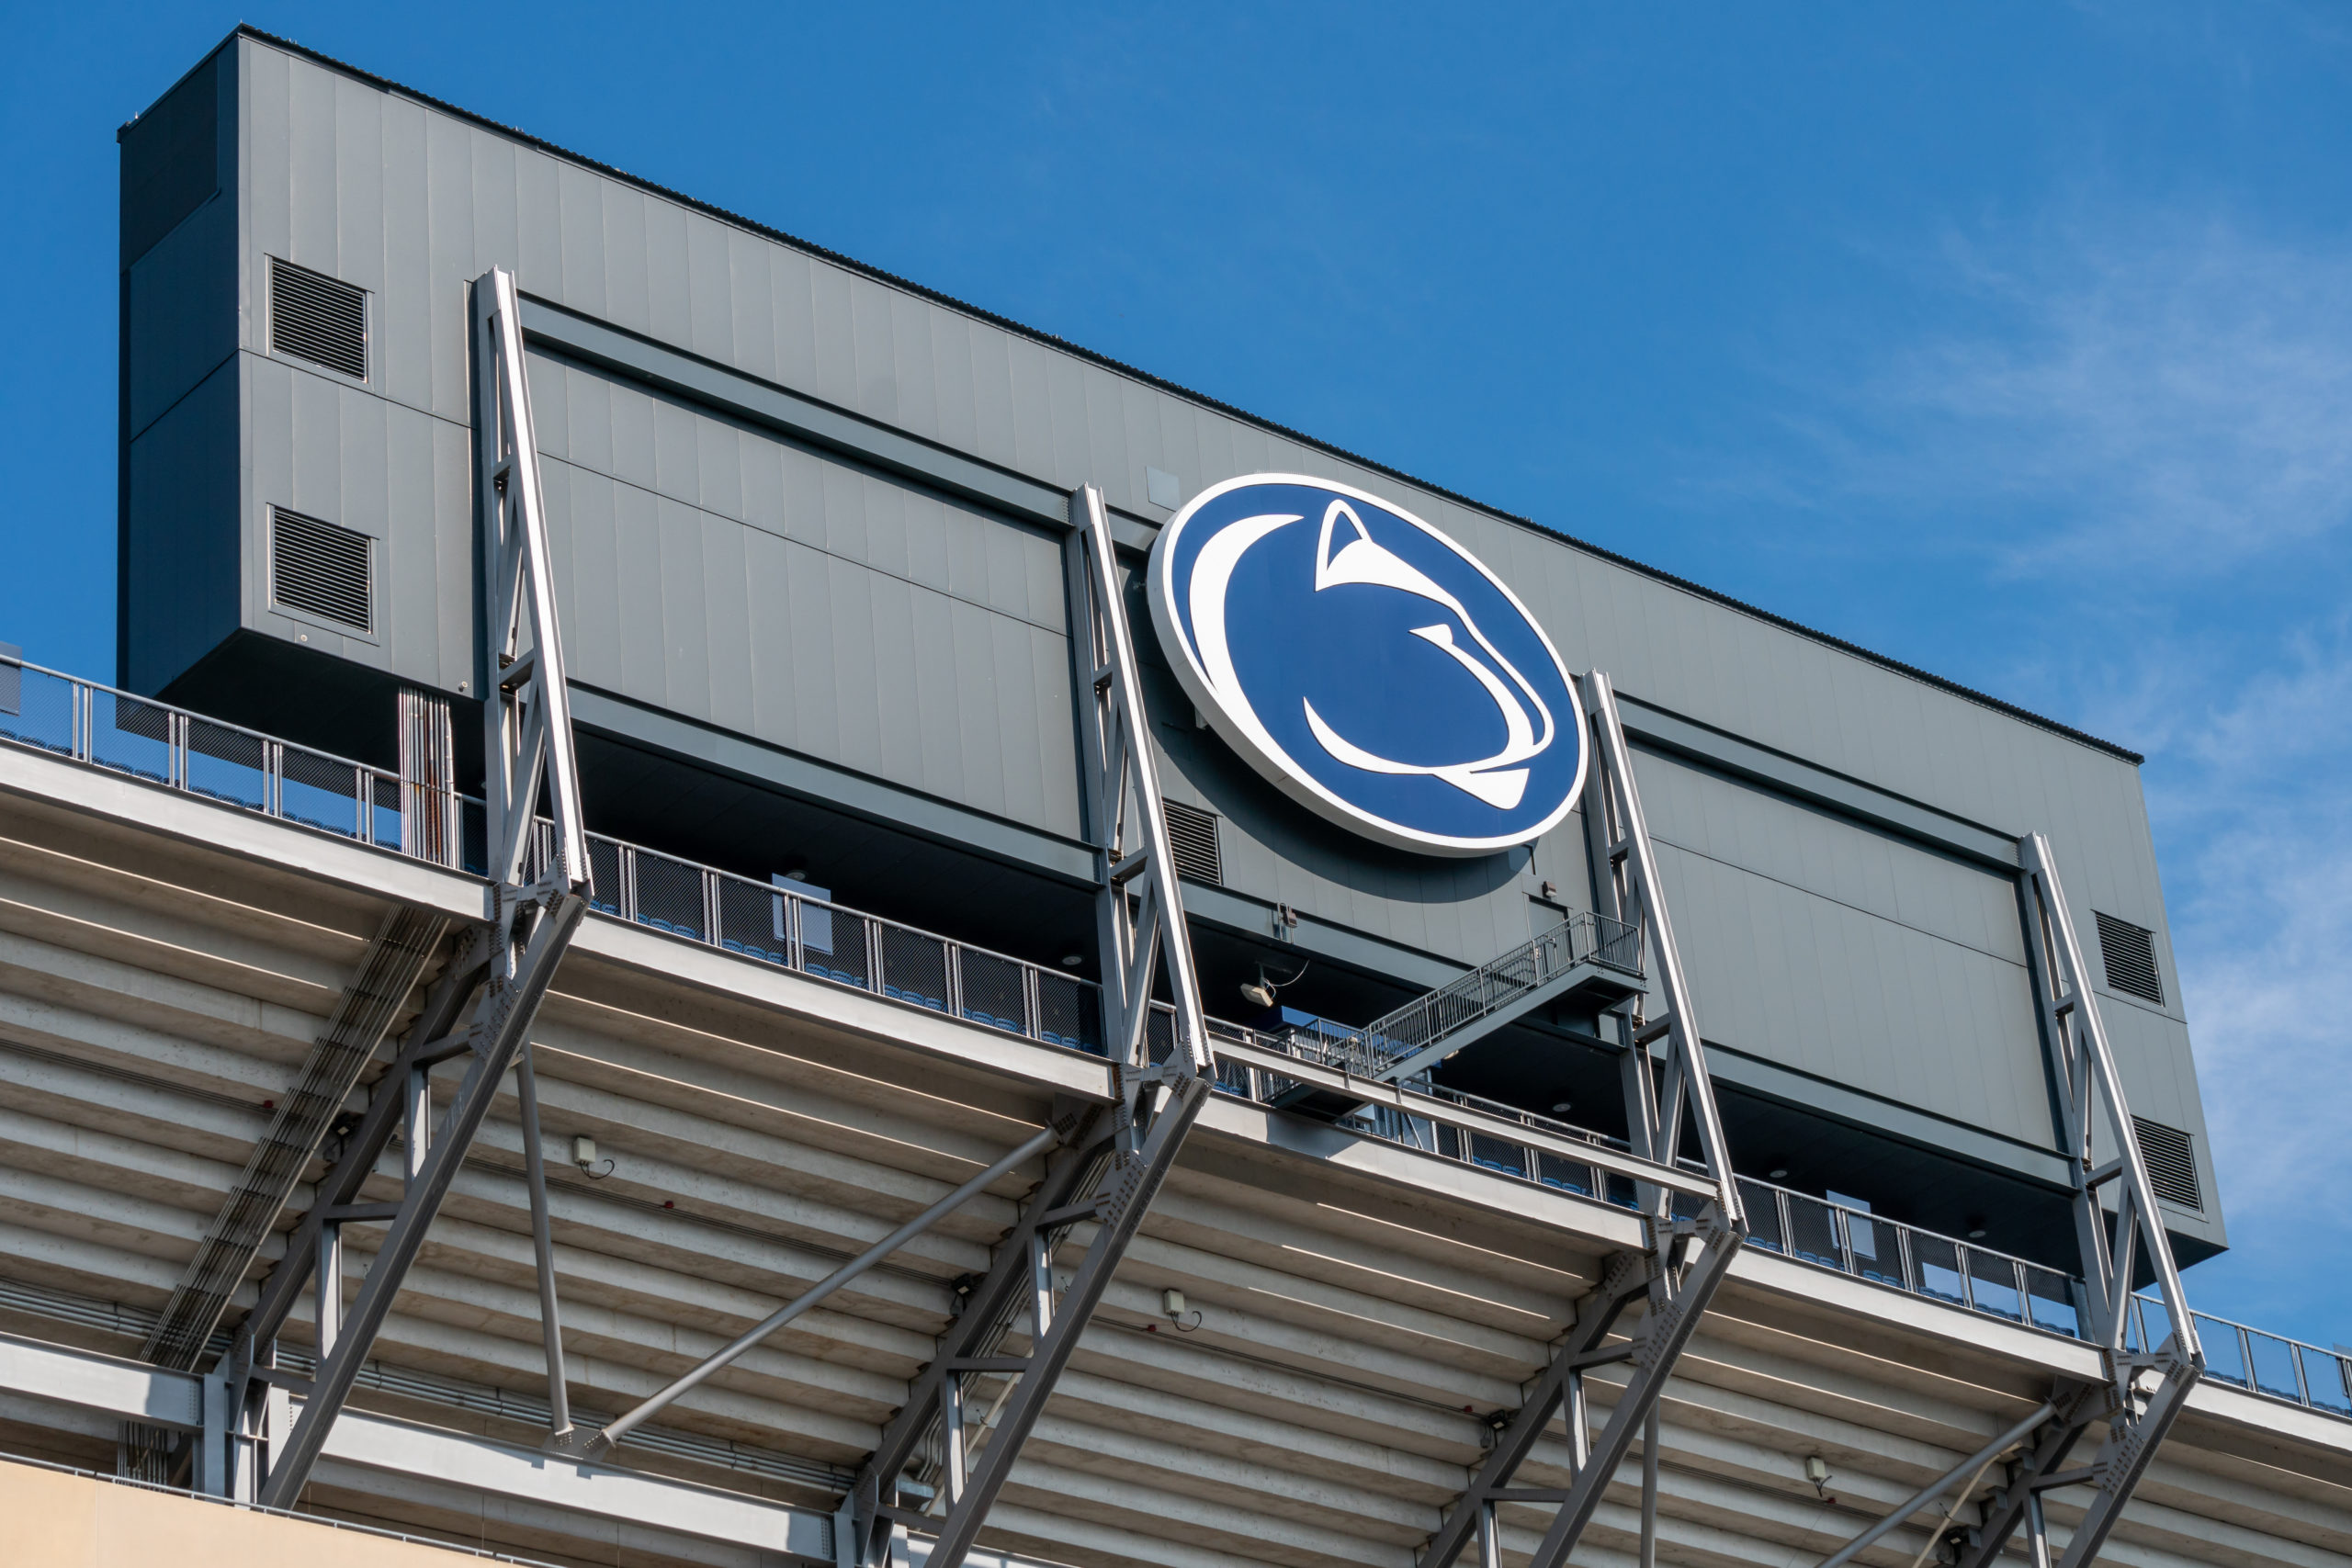 Penn State Football Won’t Require Proof Of COVID Vaccination At Games